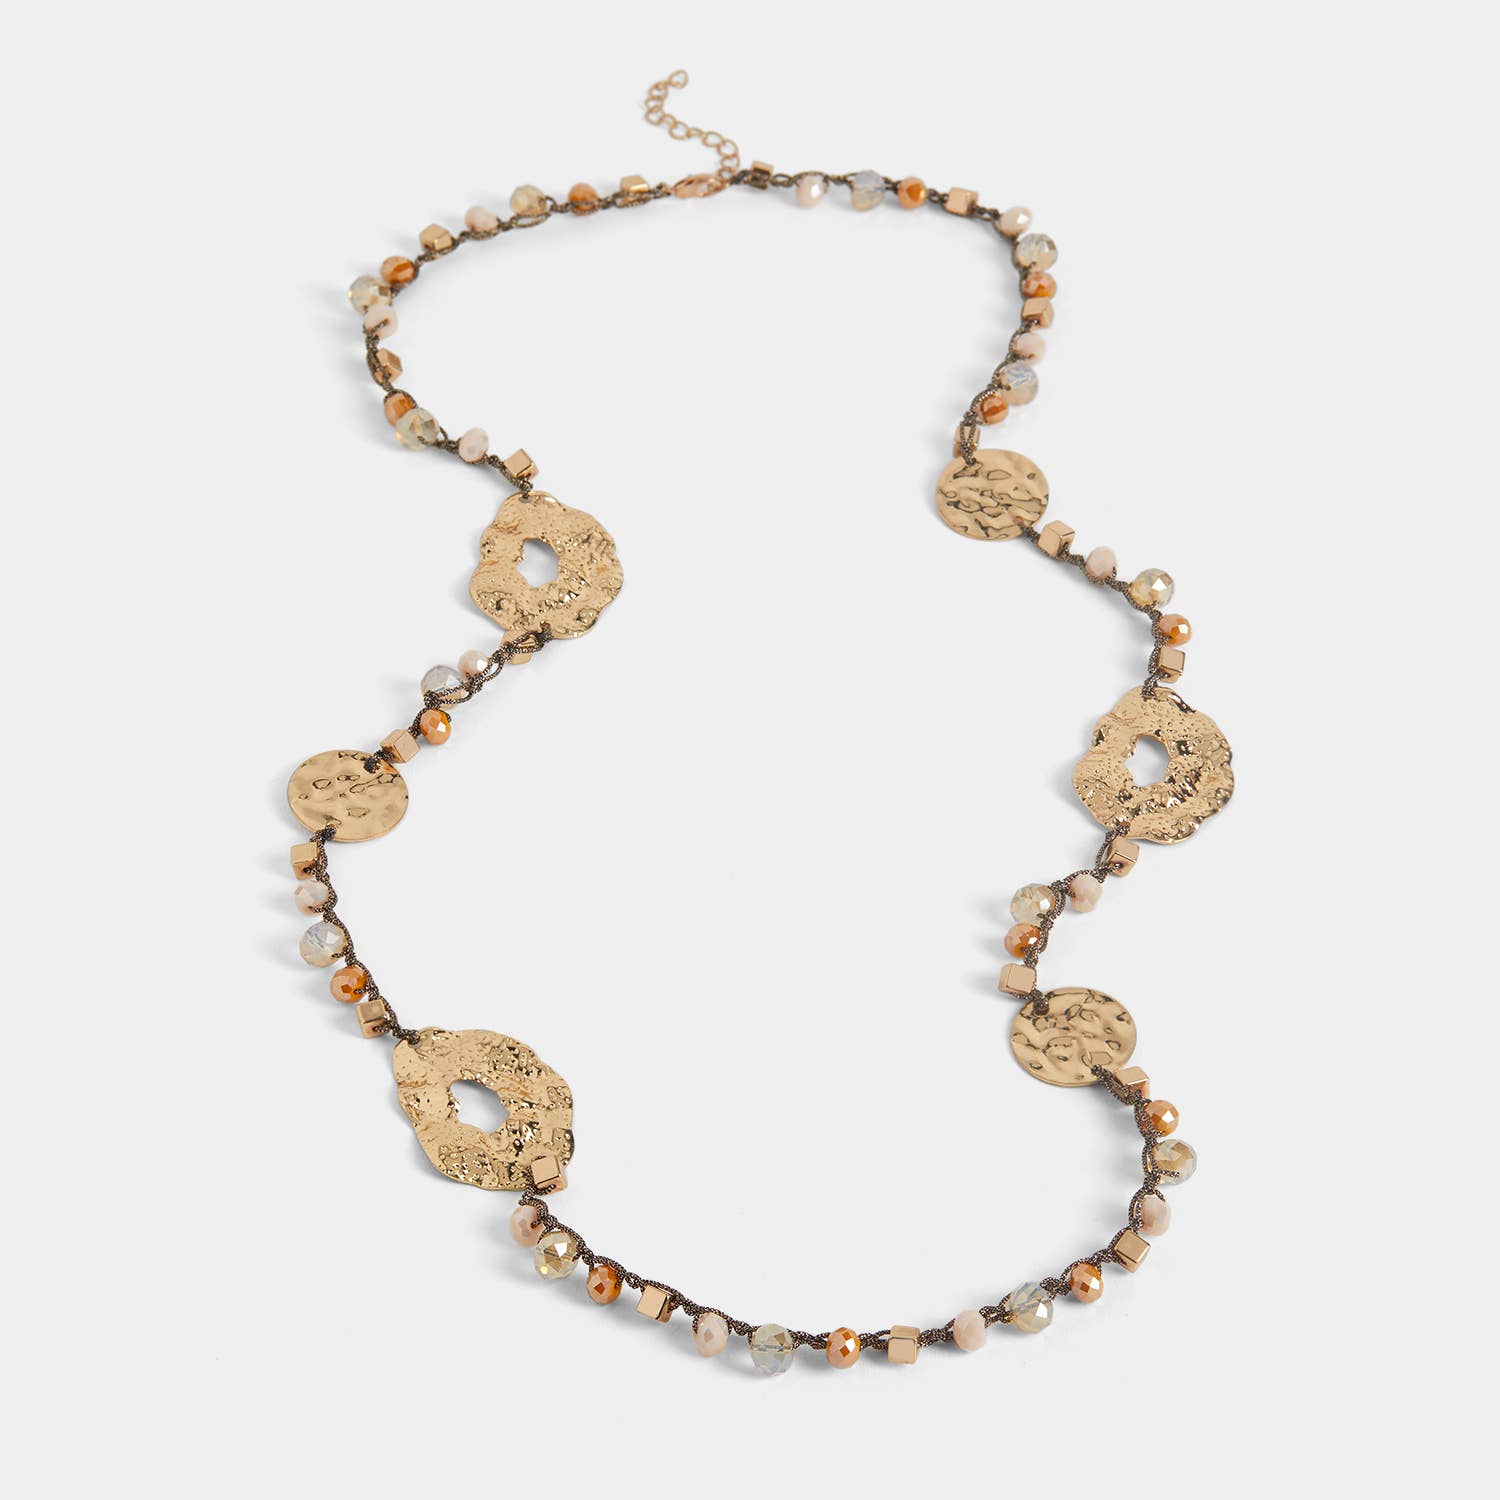 "Ayla Gold Necklace - Beaded Corded Perfect Necklace for any outfit" Fall-Winter COCO + CARMEN